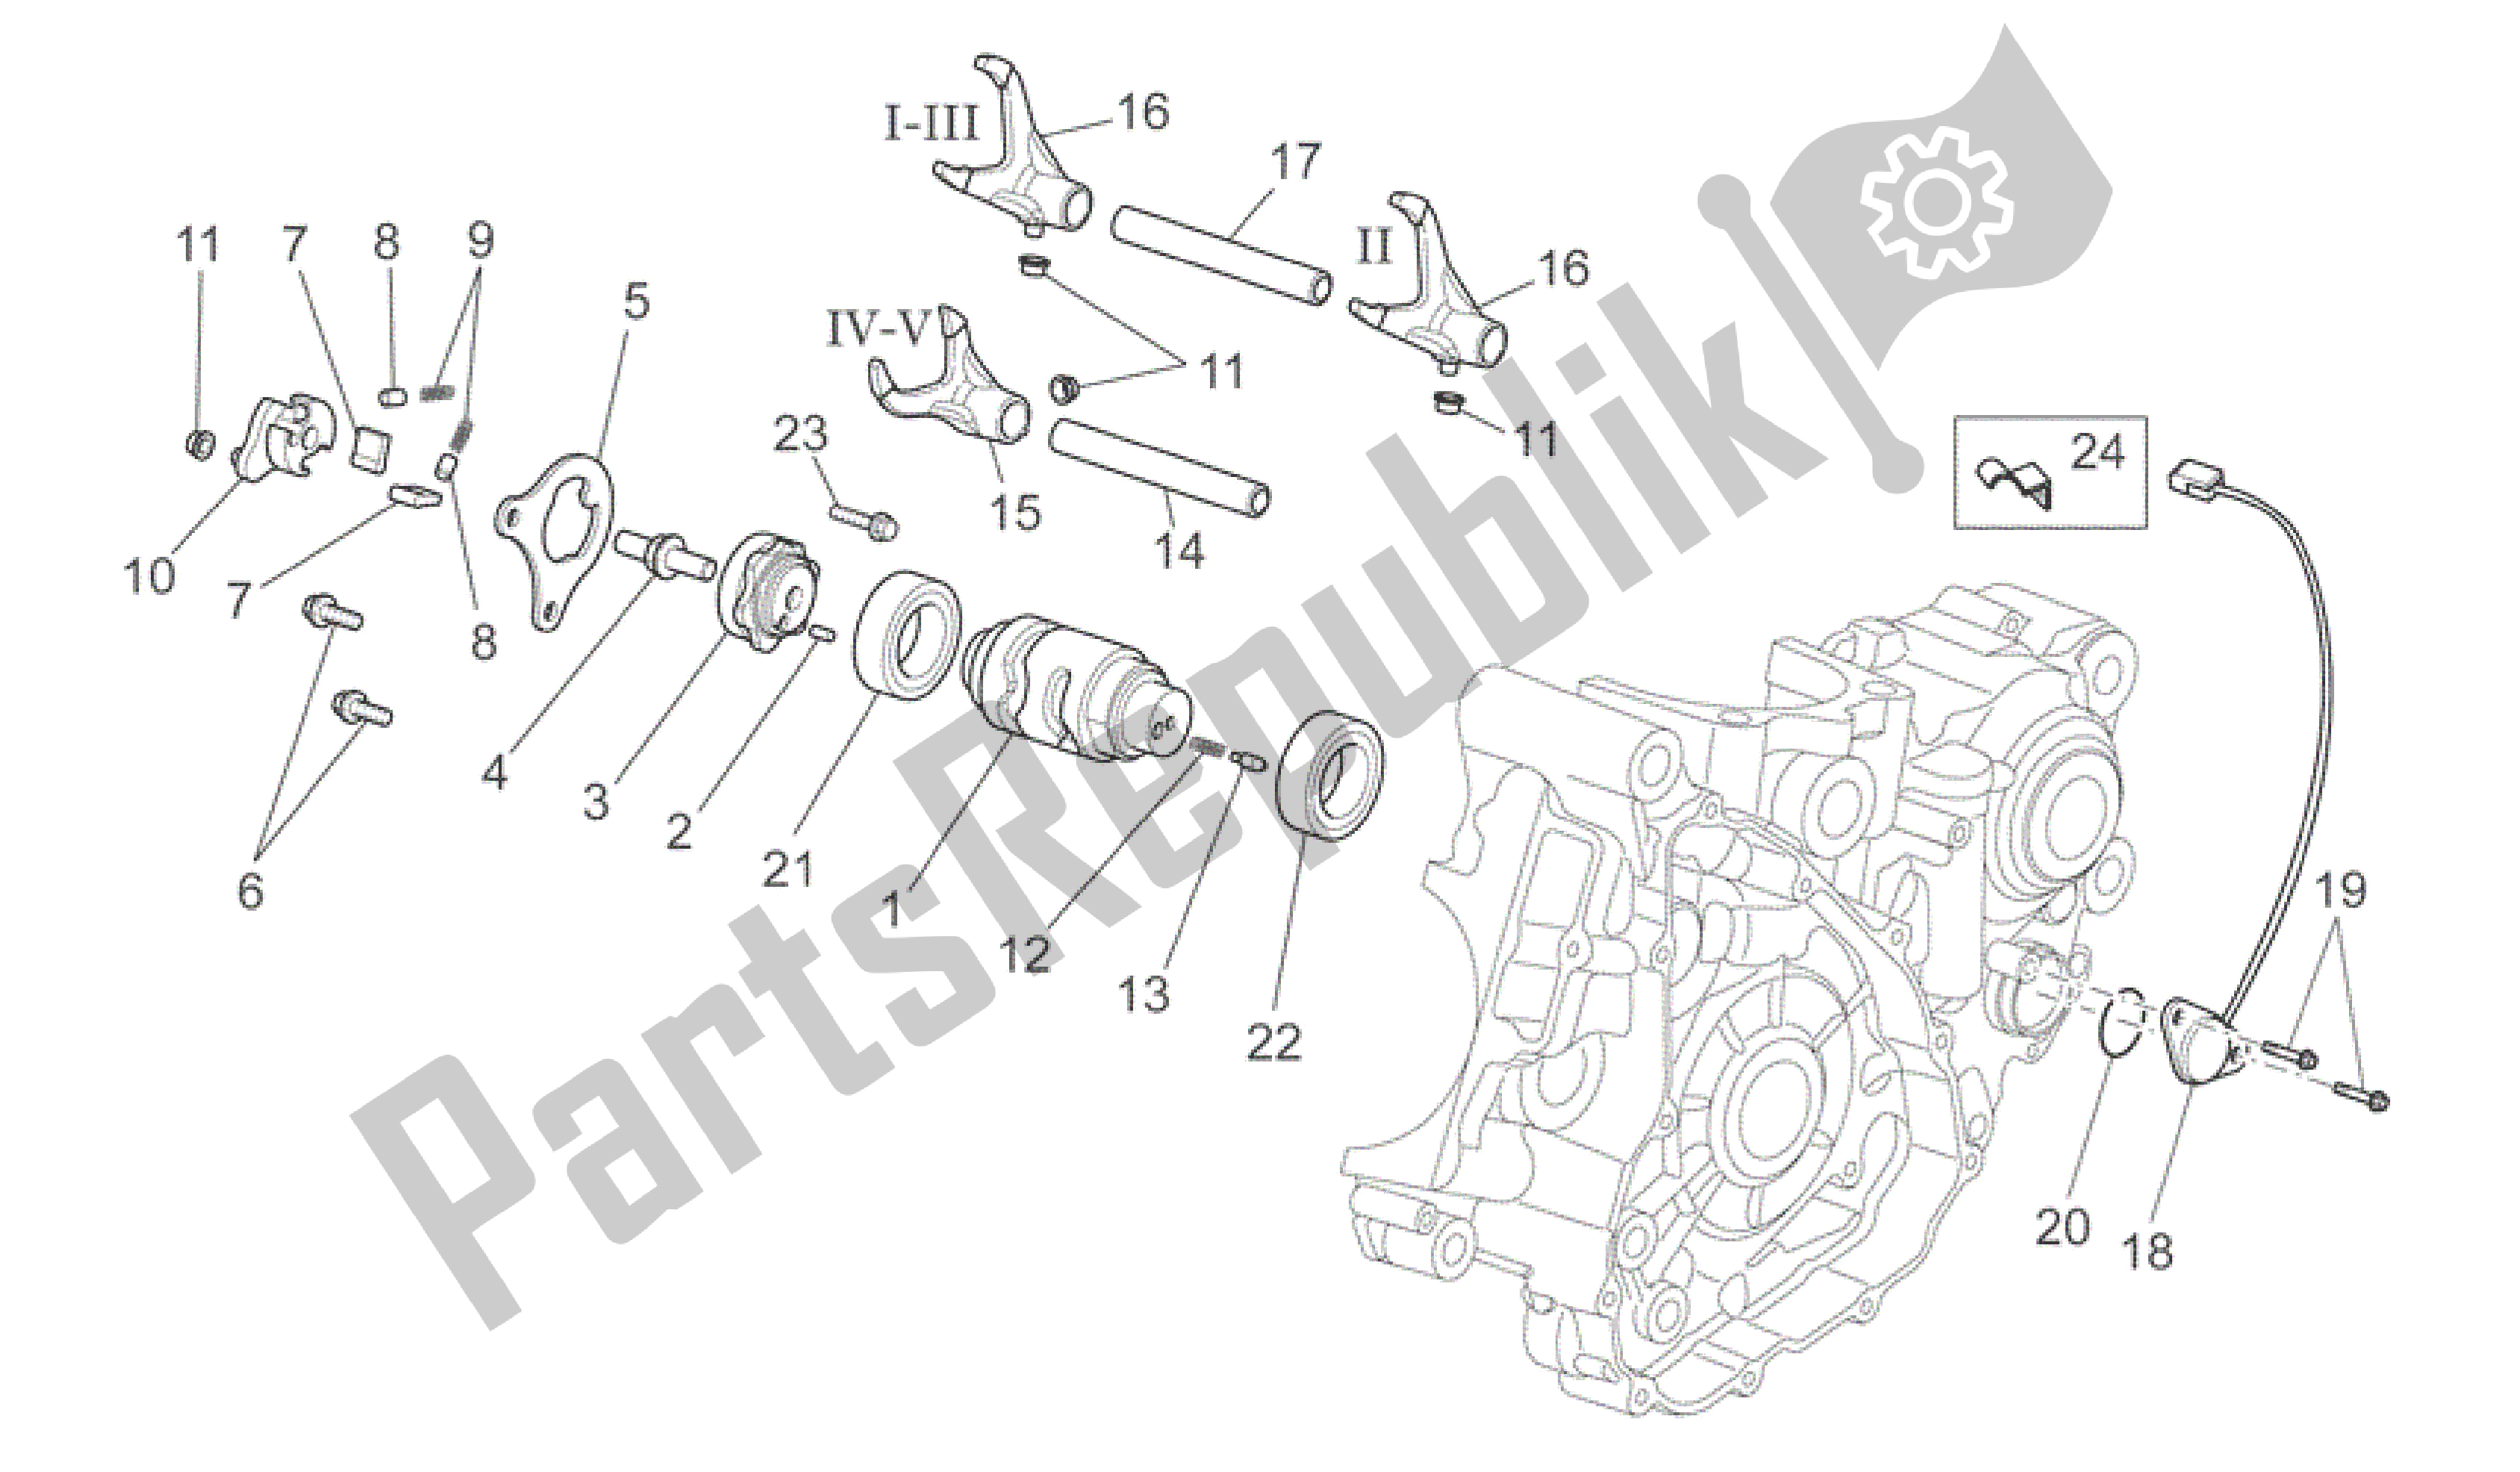 All parts for the Gear Box Selector Ii of the Aprilia RXV 450 2009 - 2011